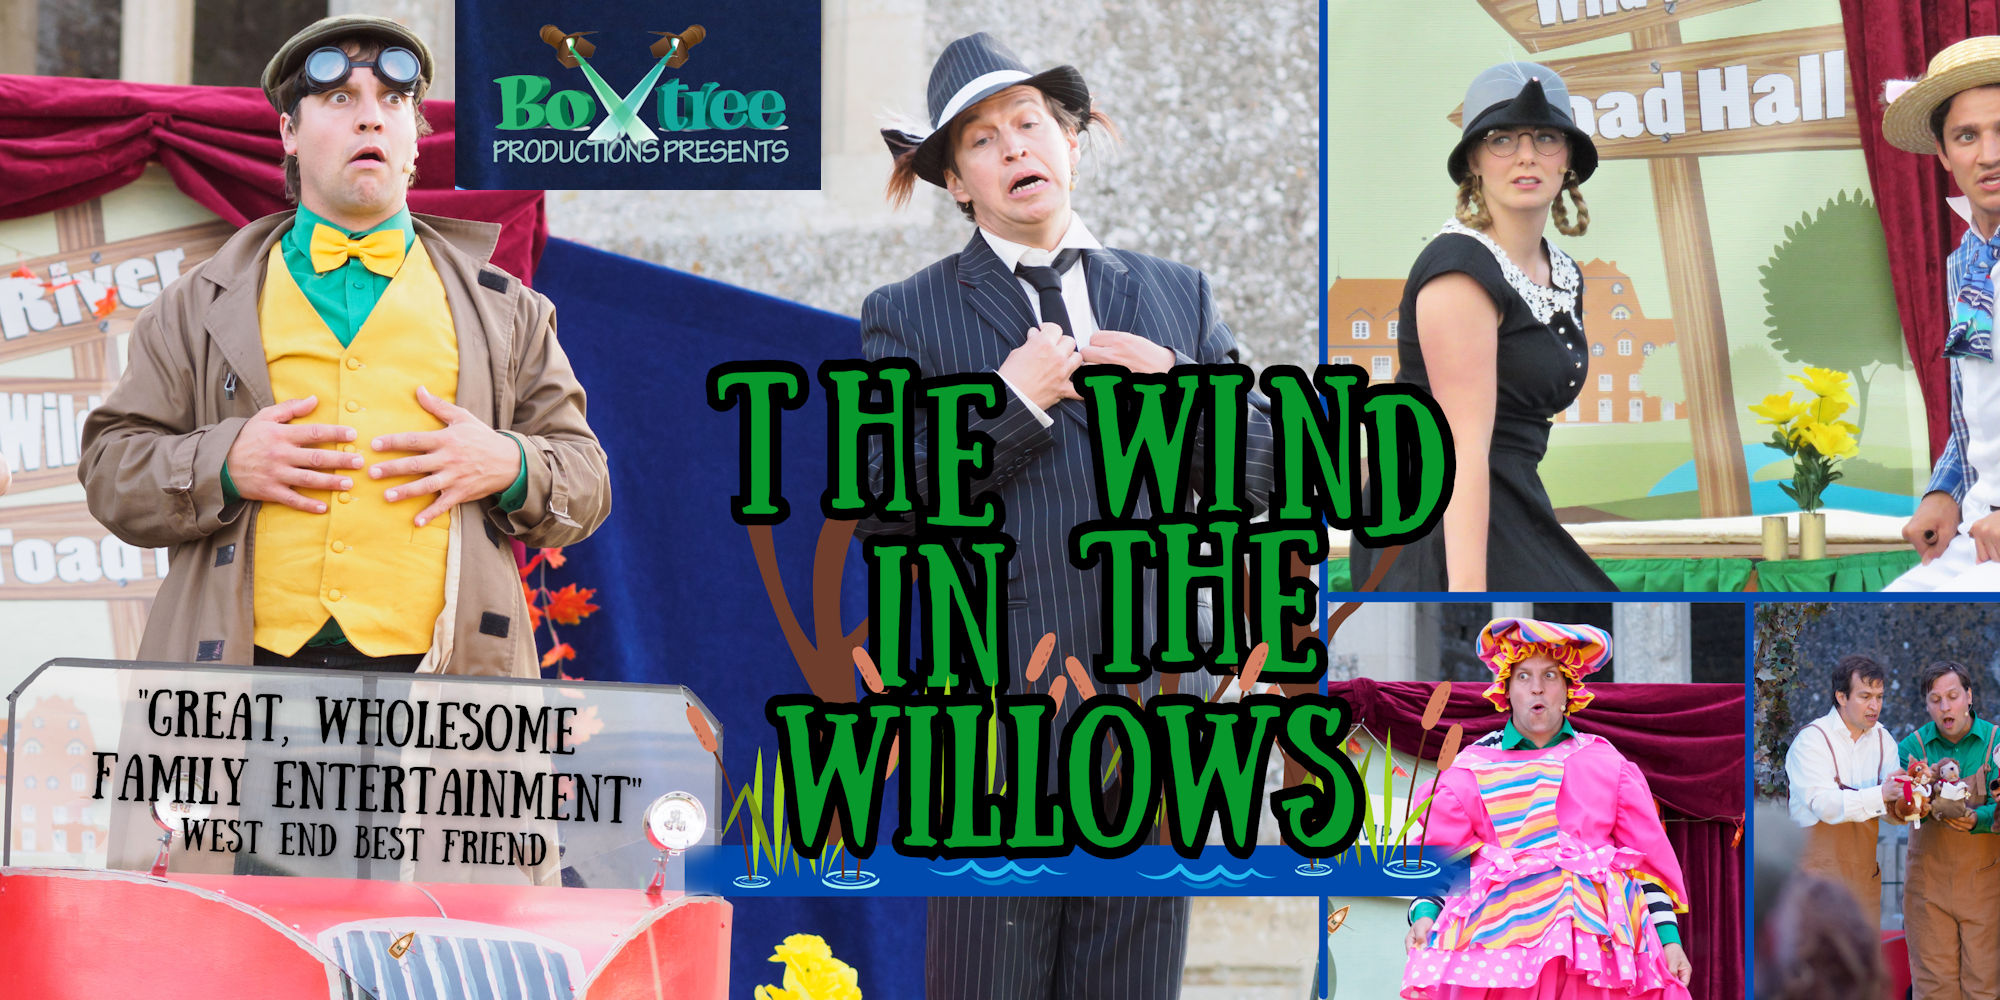 The Wind in the Willows with images of the actors during a performance